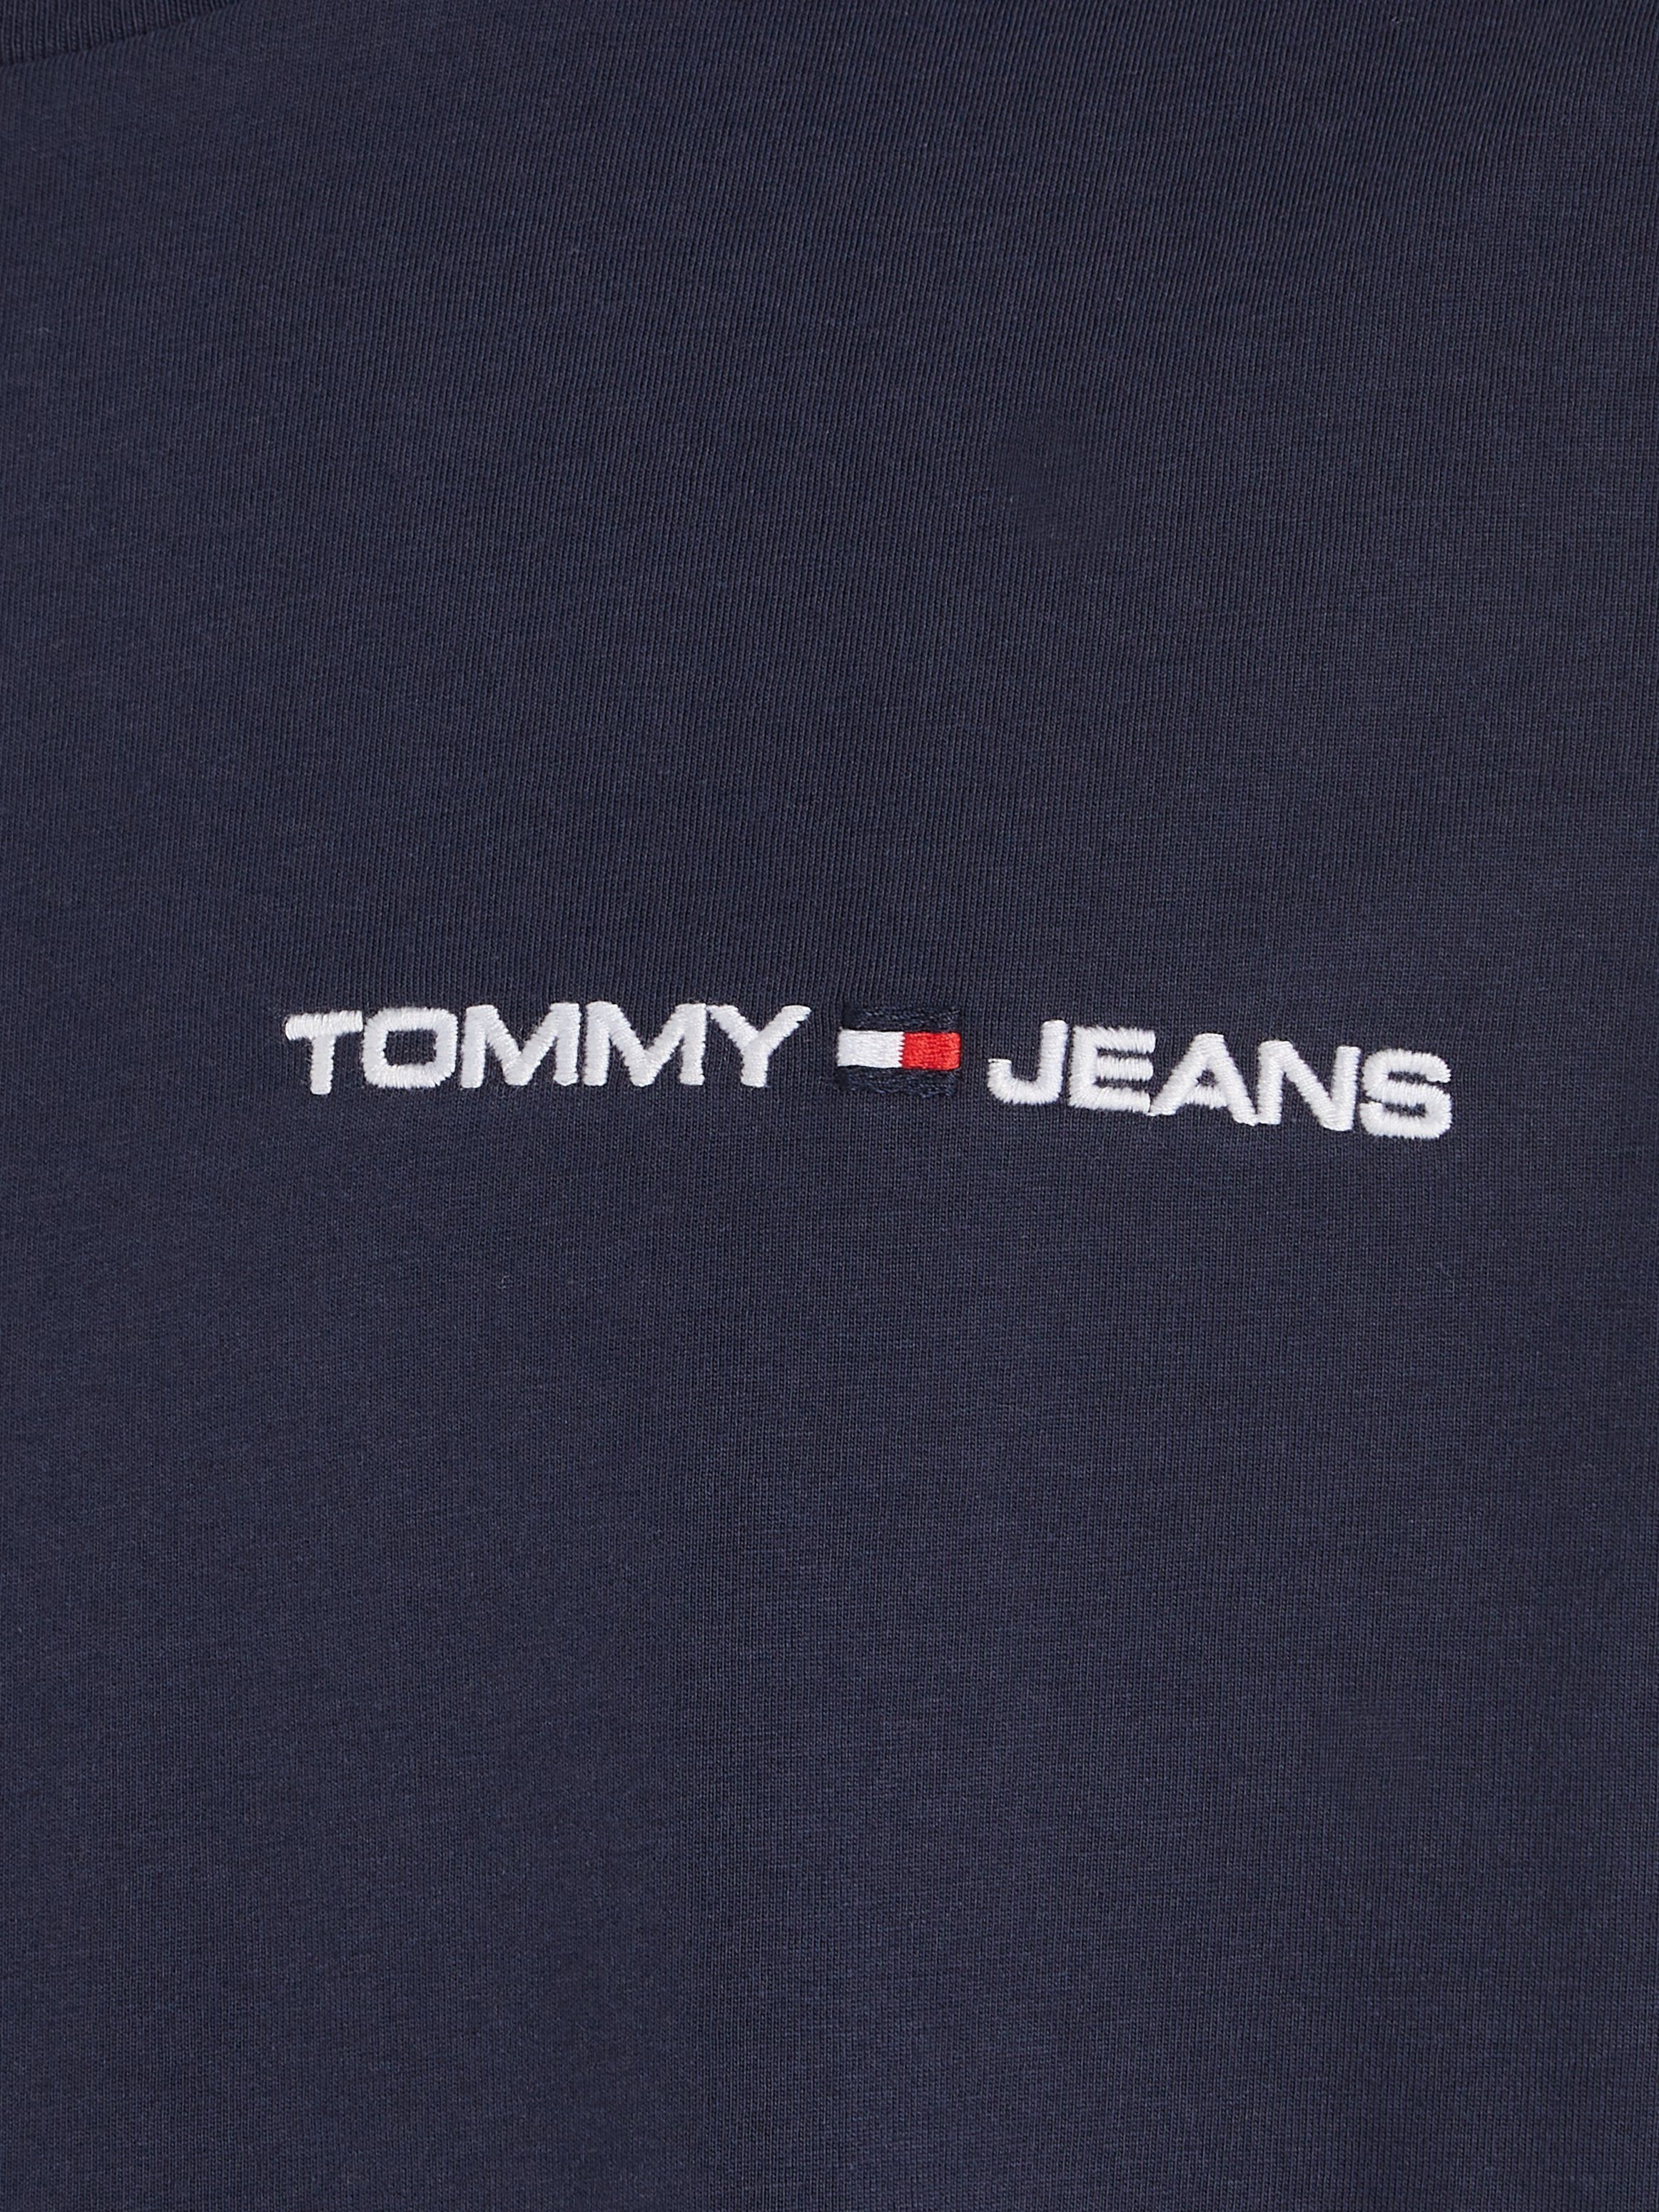 TEE LINEAR CLSC T-Shirt CHEST Twilight TJM Tommy Jeans Navy